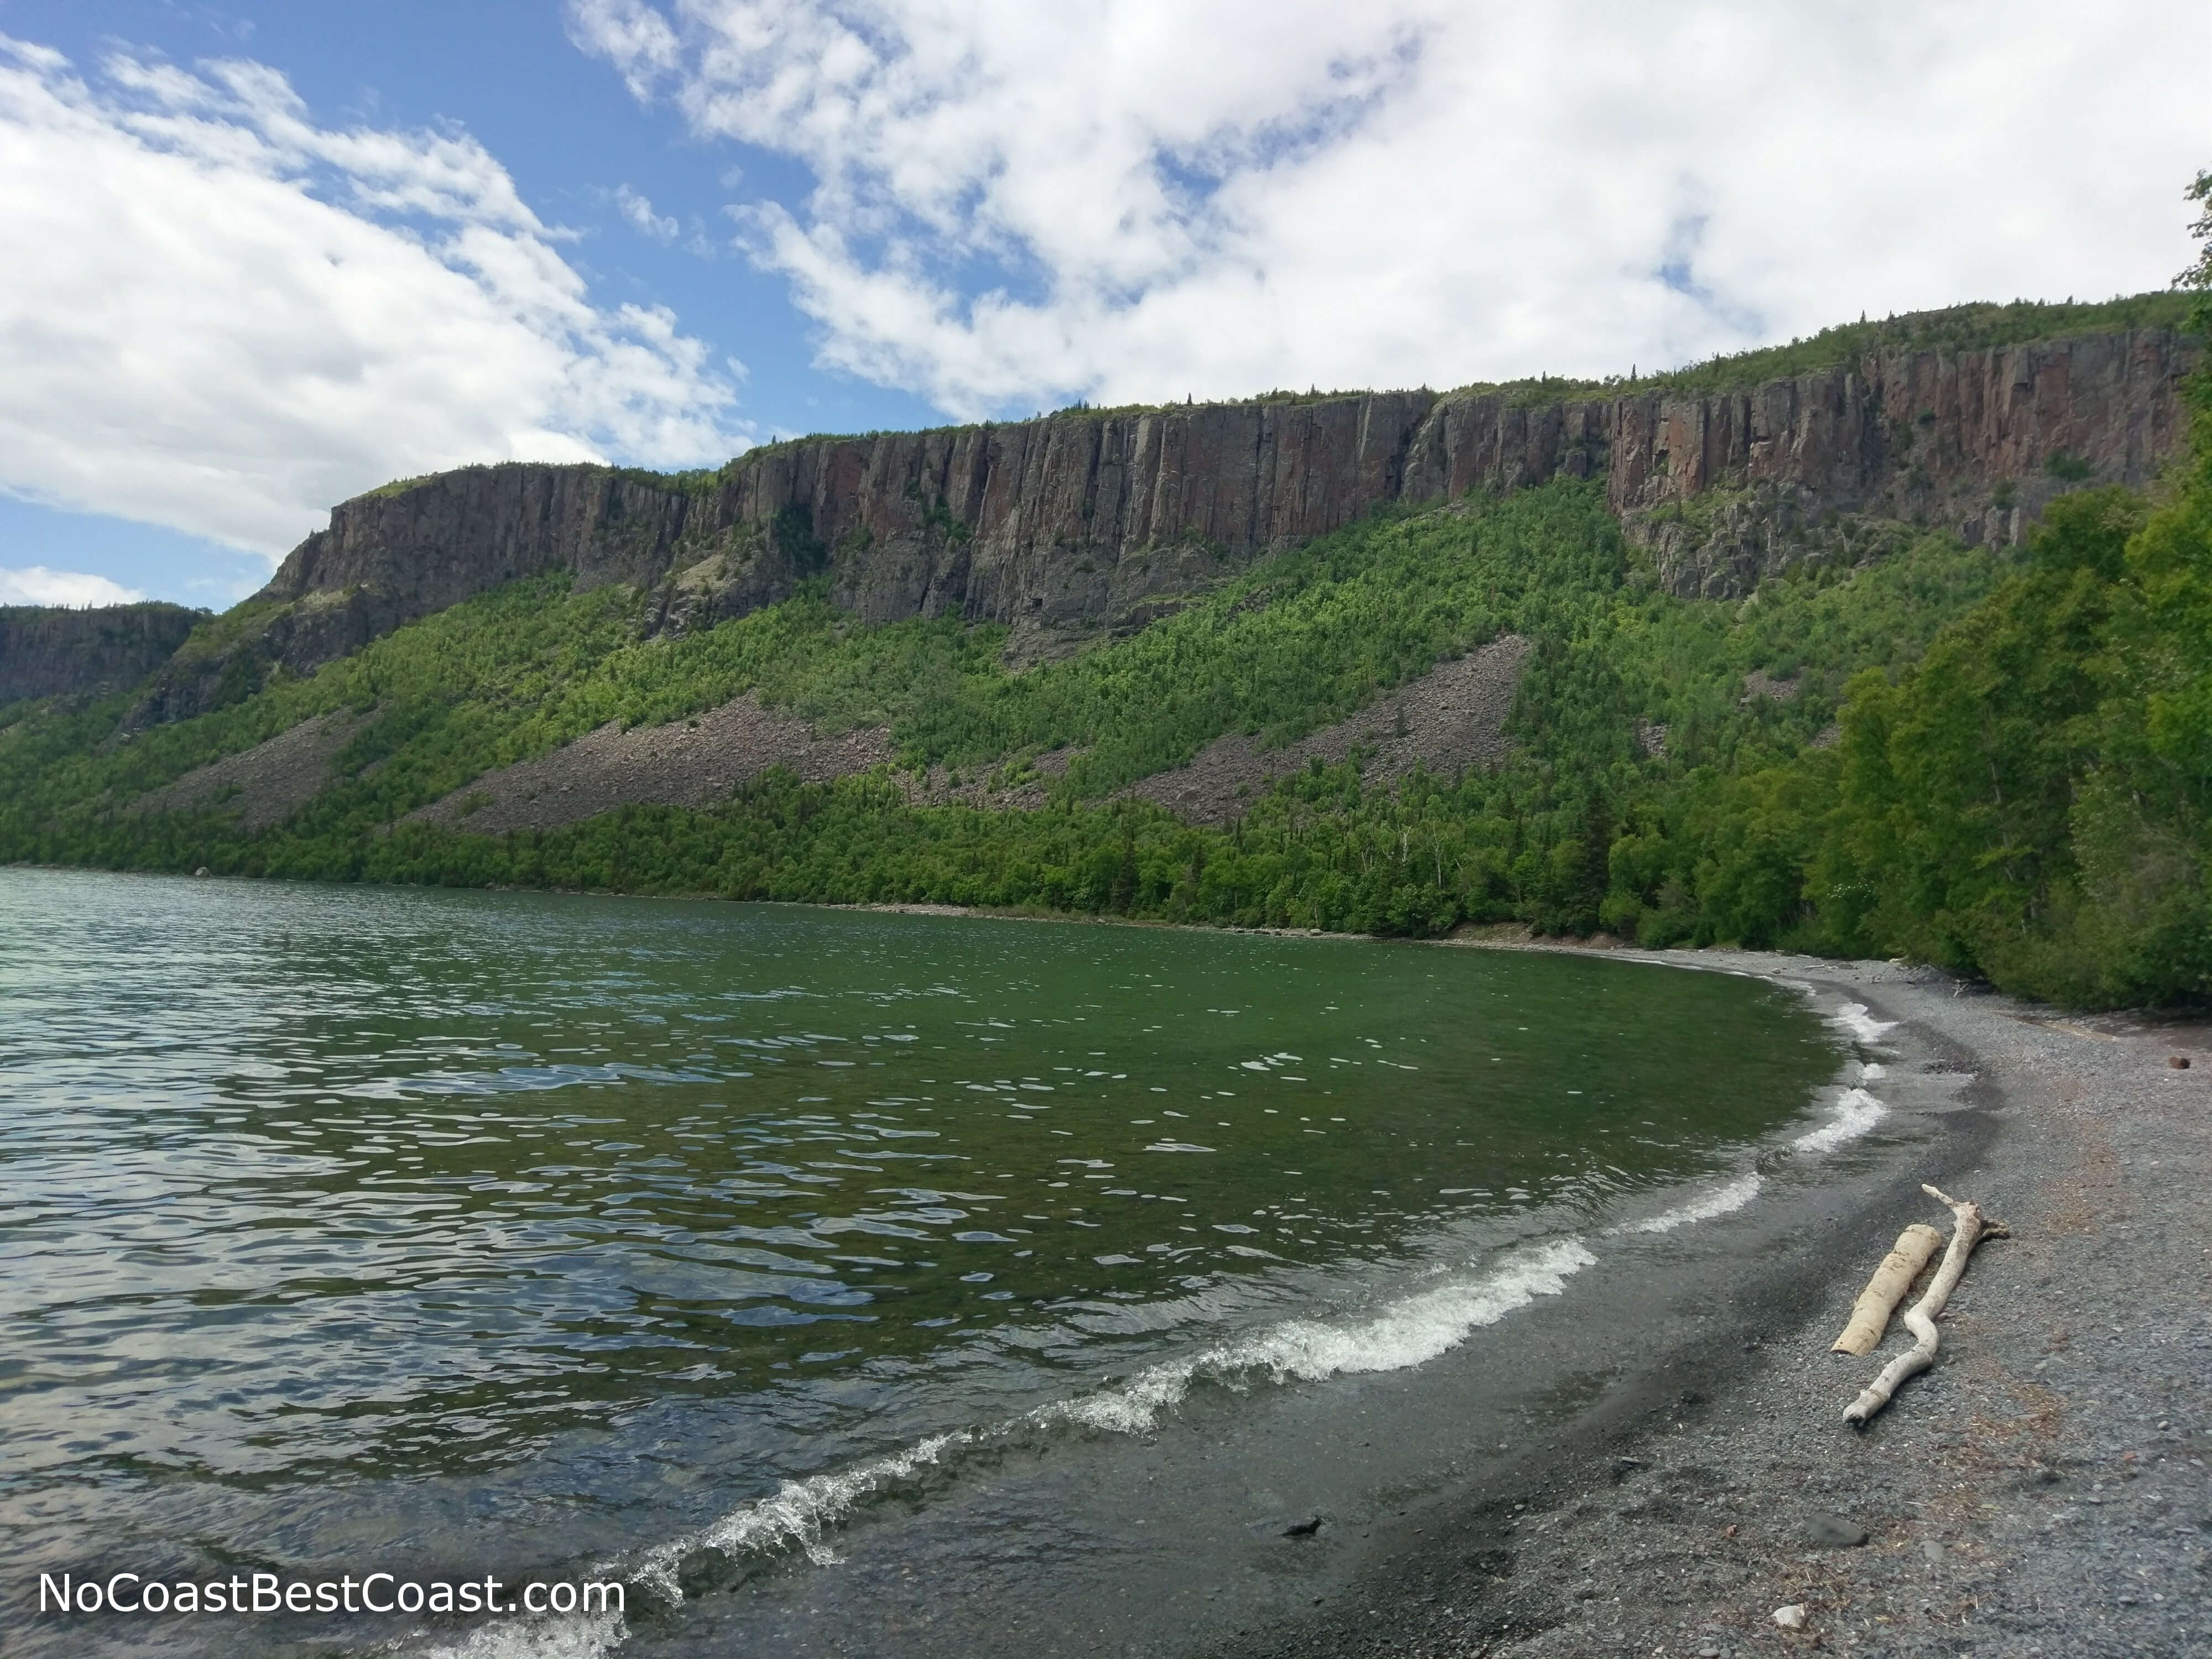 The cliffs of the Sleeping Giant as seen from Lehtinen's Bay